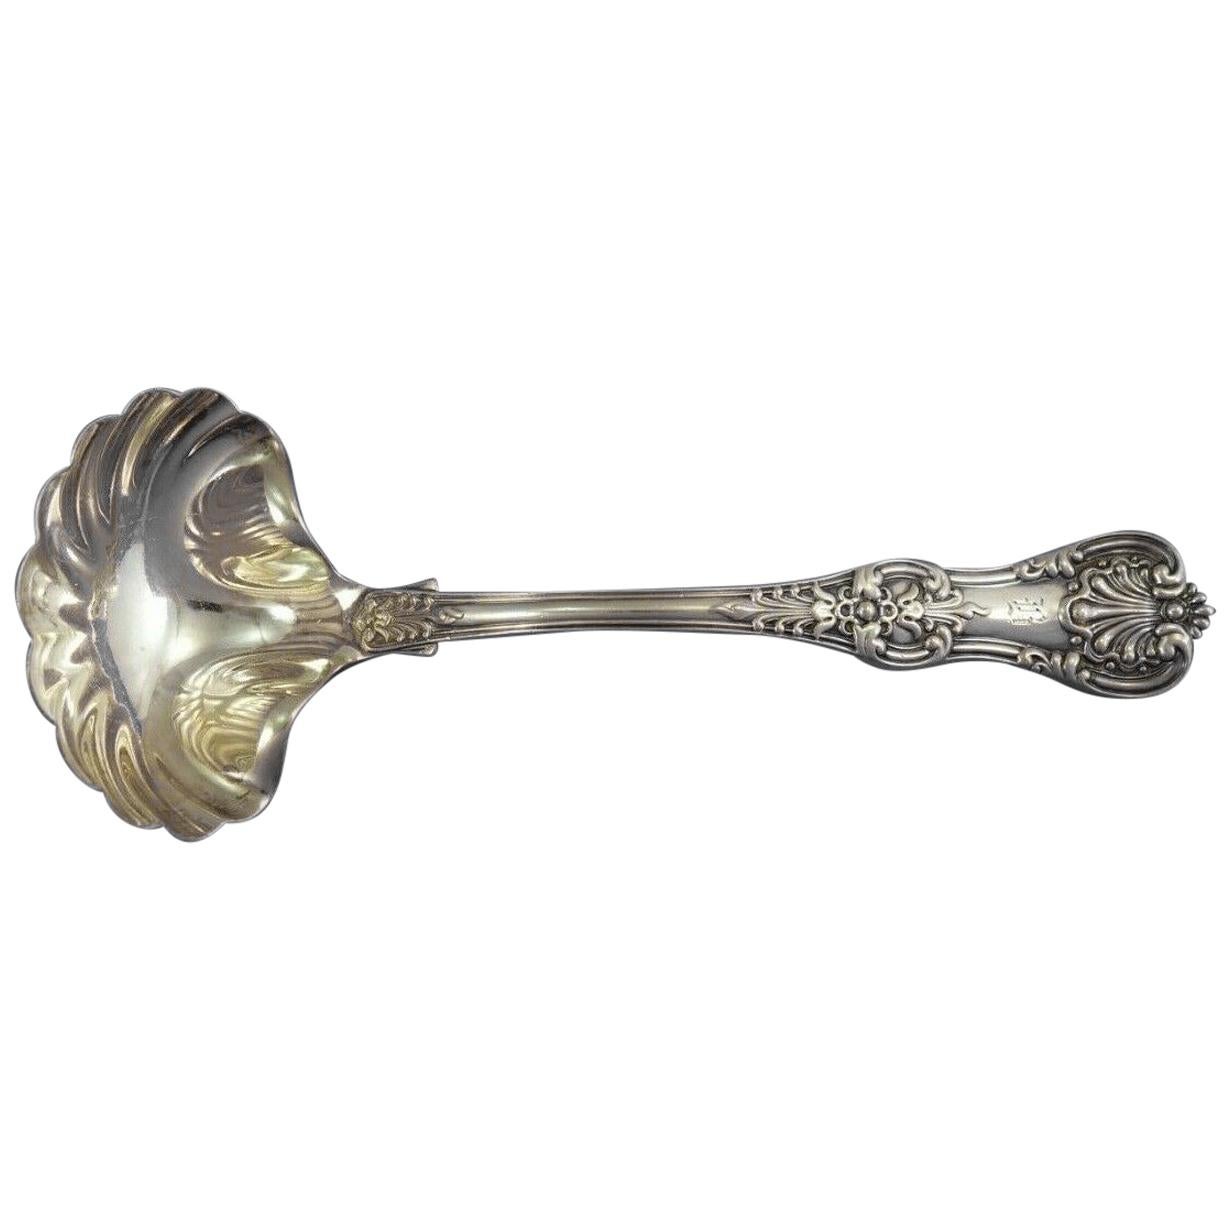 English King by Tiffany & Co. Sterling Silver Gravy Ladle Shell Bowl